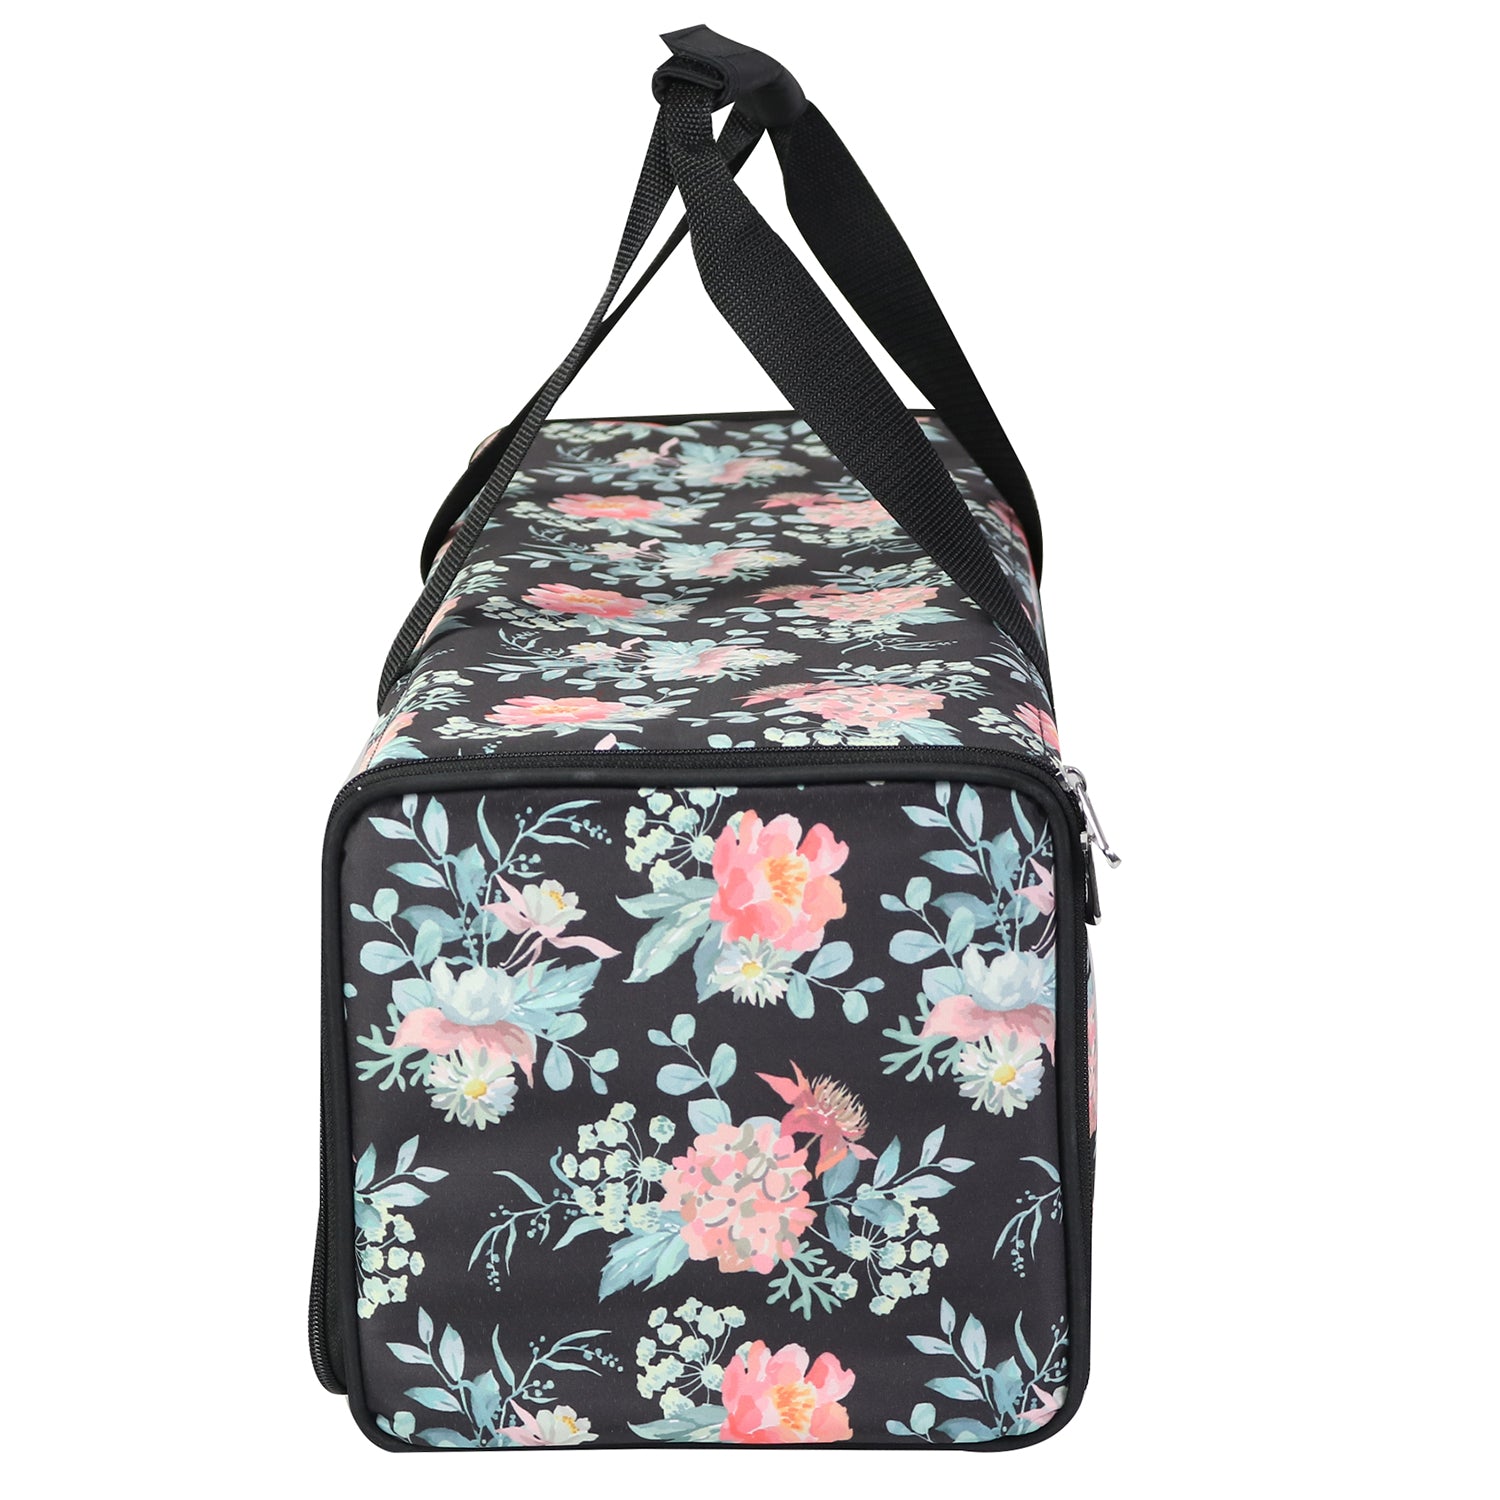 Die Cut Carrying Carrying Case for Cricut Explore & ScanNCut DX, Flora -  Everything Mary